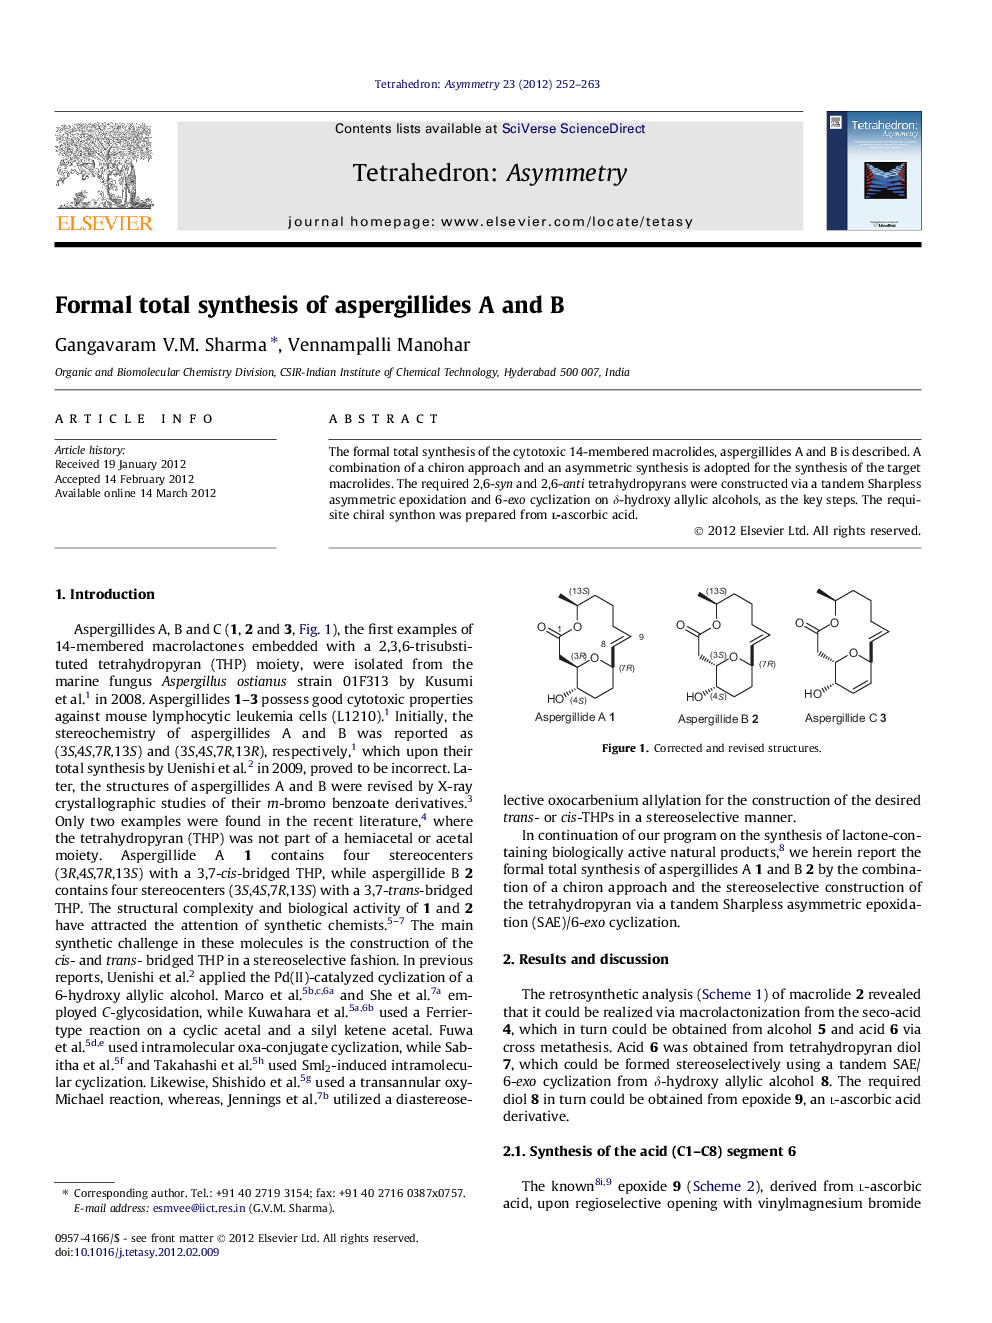 Formal total synthesis of aspergillides A and B